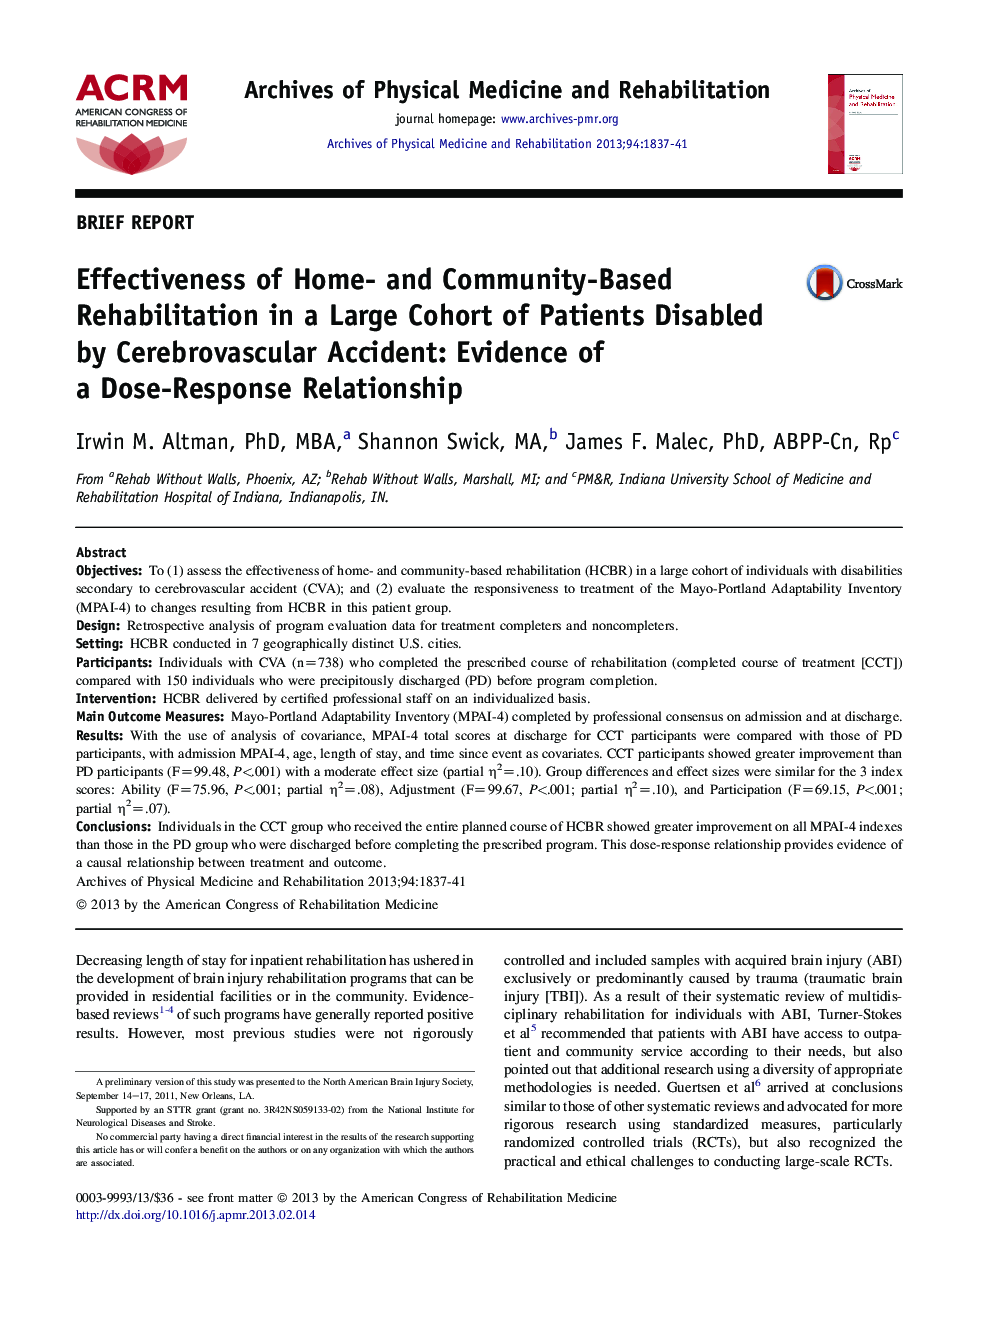 Effectiveness of Home- and Community-Based Rehabilitation in a Large Cohort of Patients Disabled by Cerebrovascular Accident: Evidence of a Dose-Response Relationship 